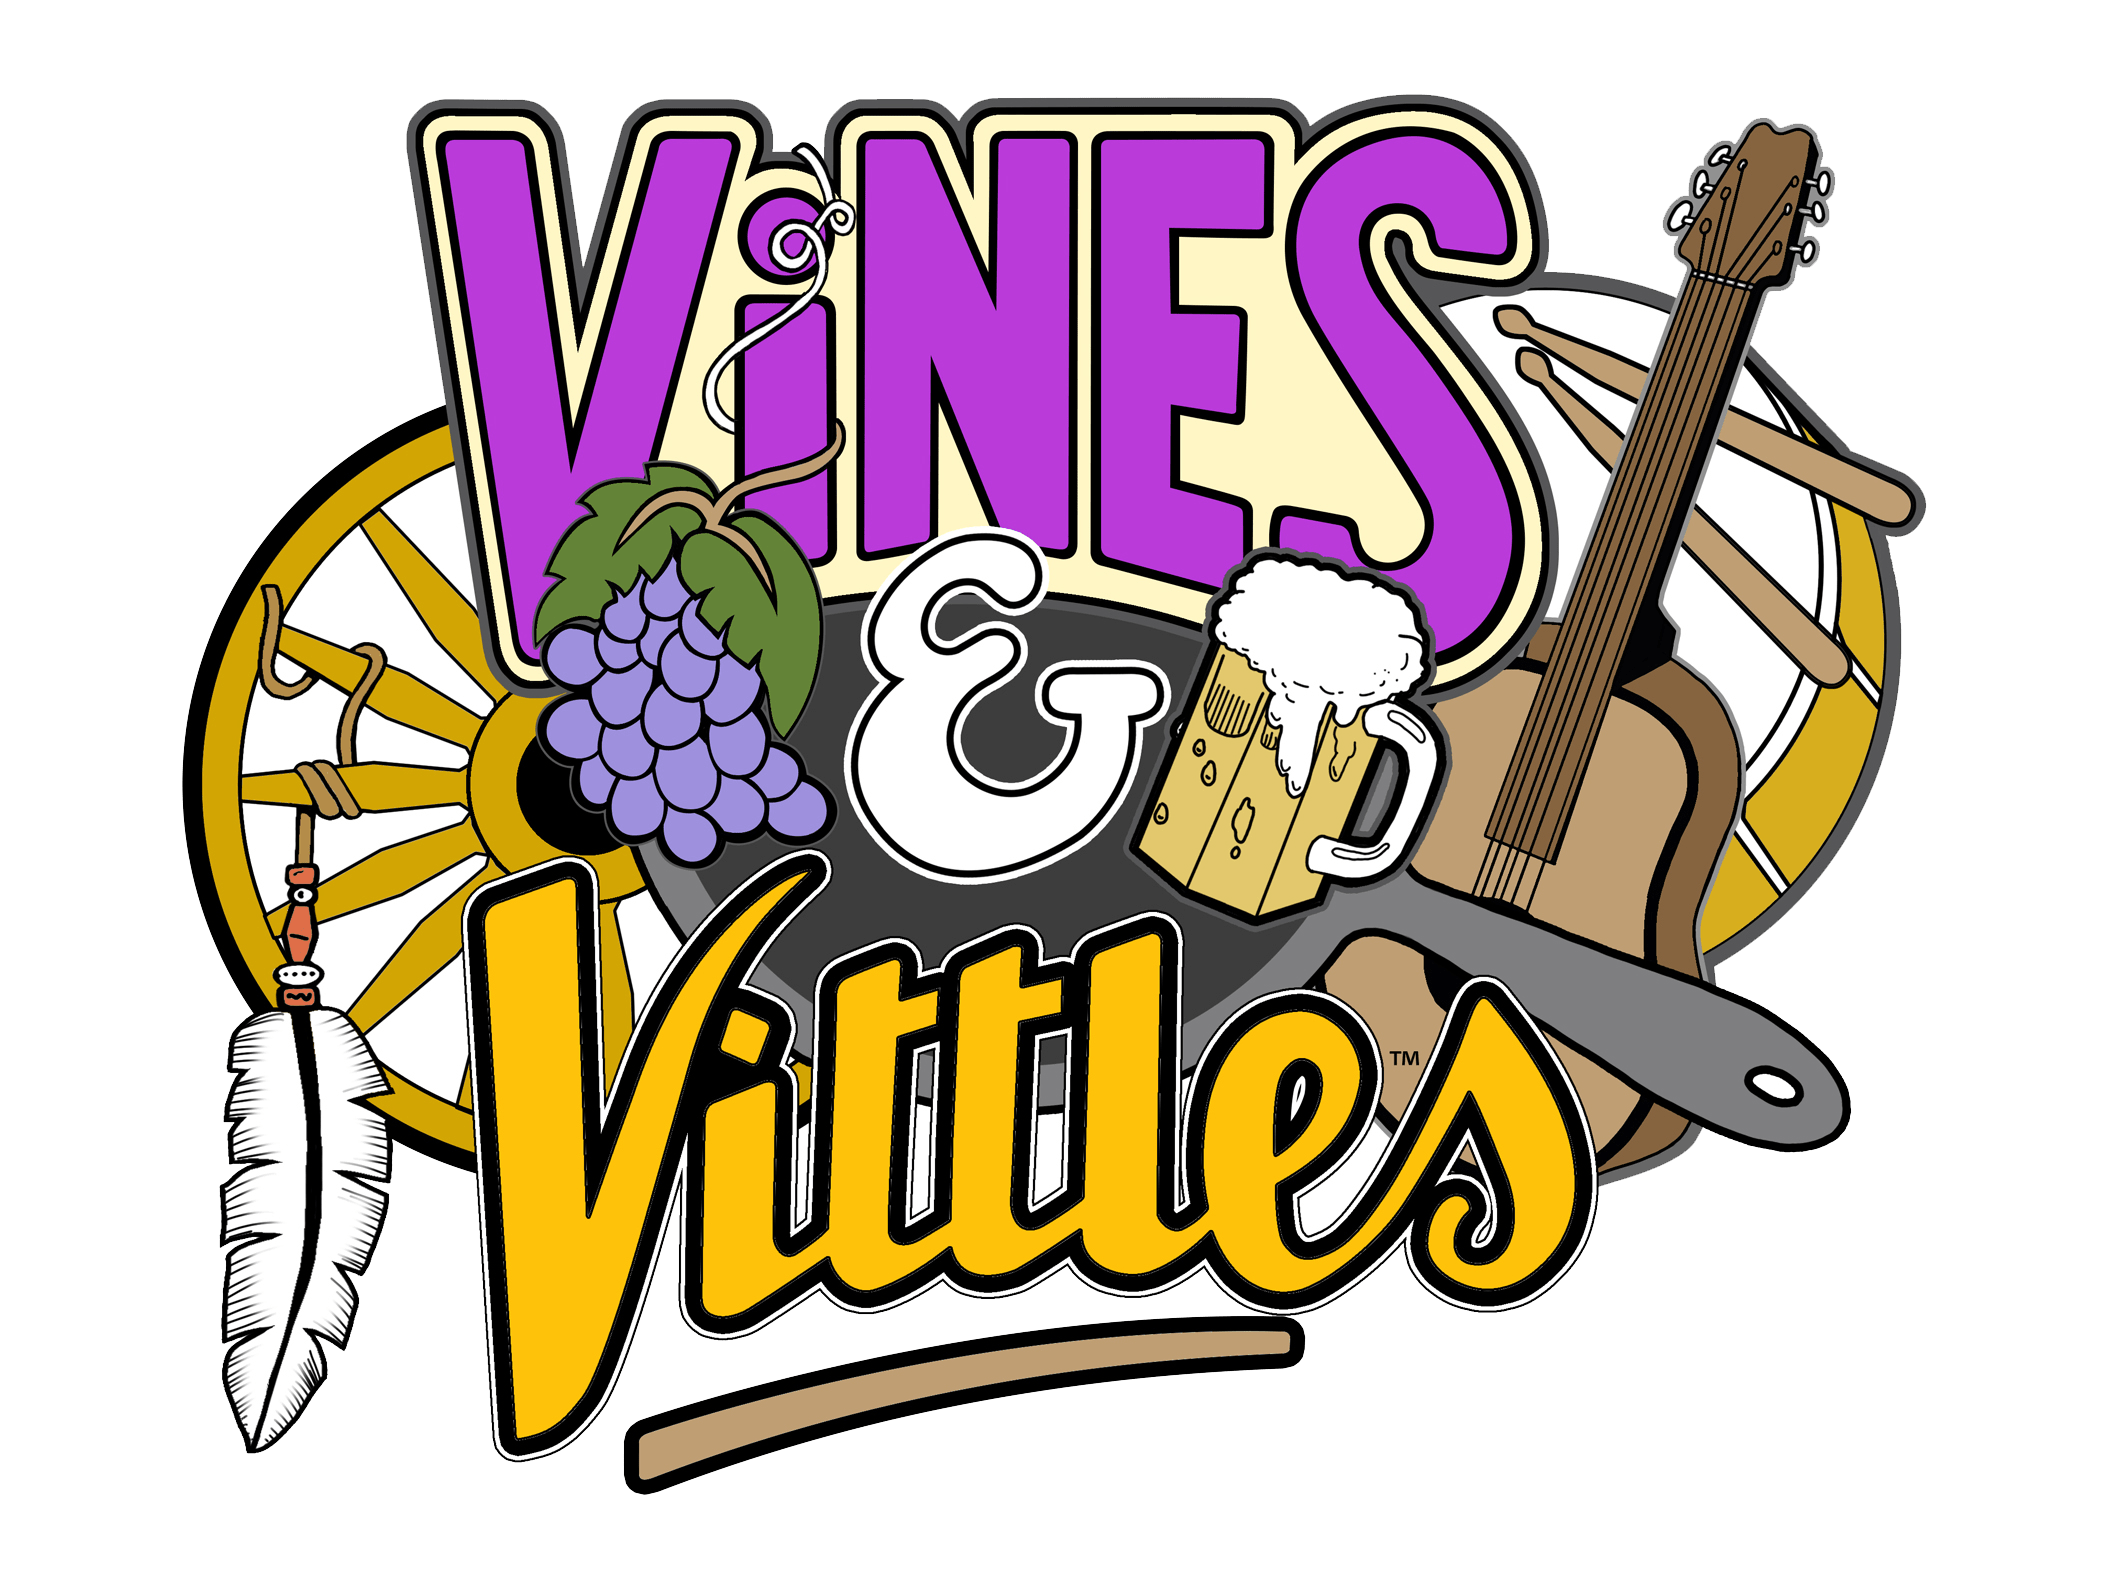 Vines and Vittles